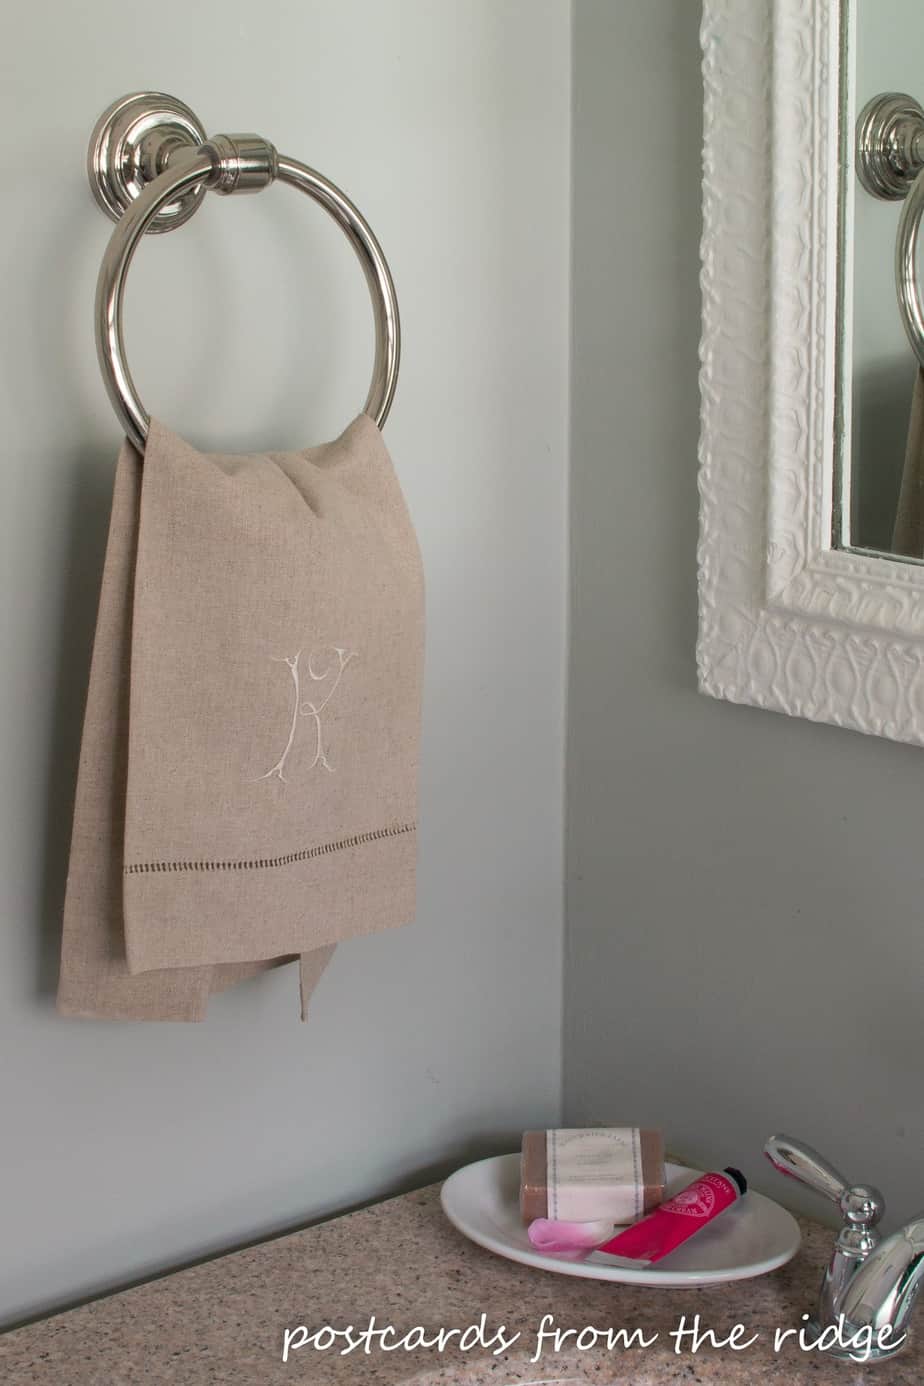 Monogrammed linen guest towel. Postcards from the Ridge